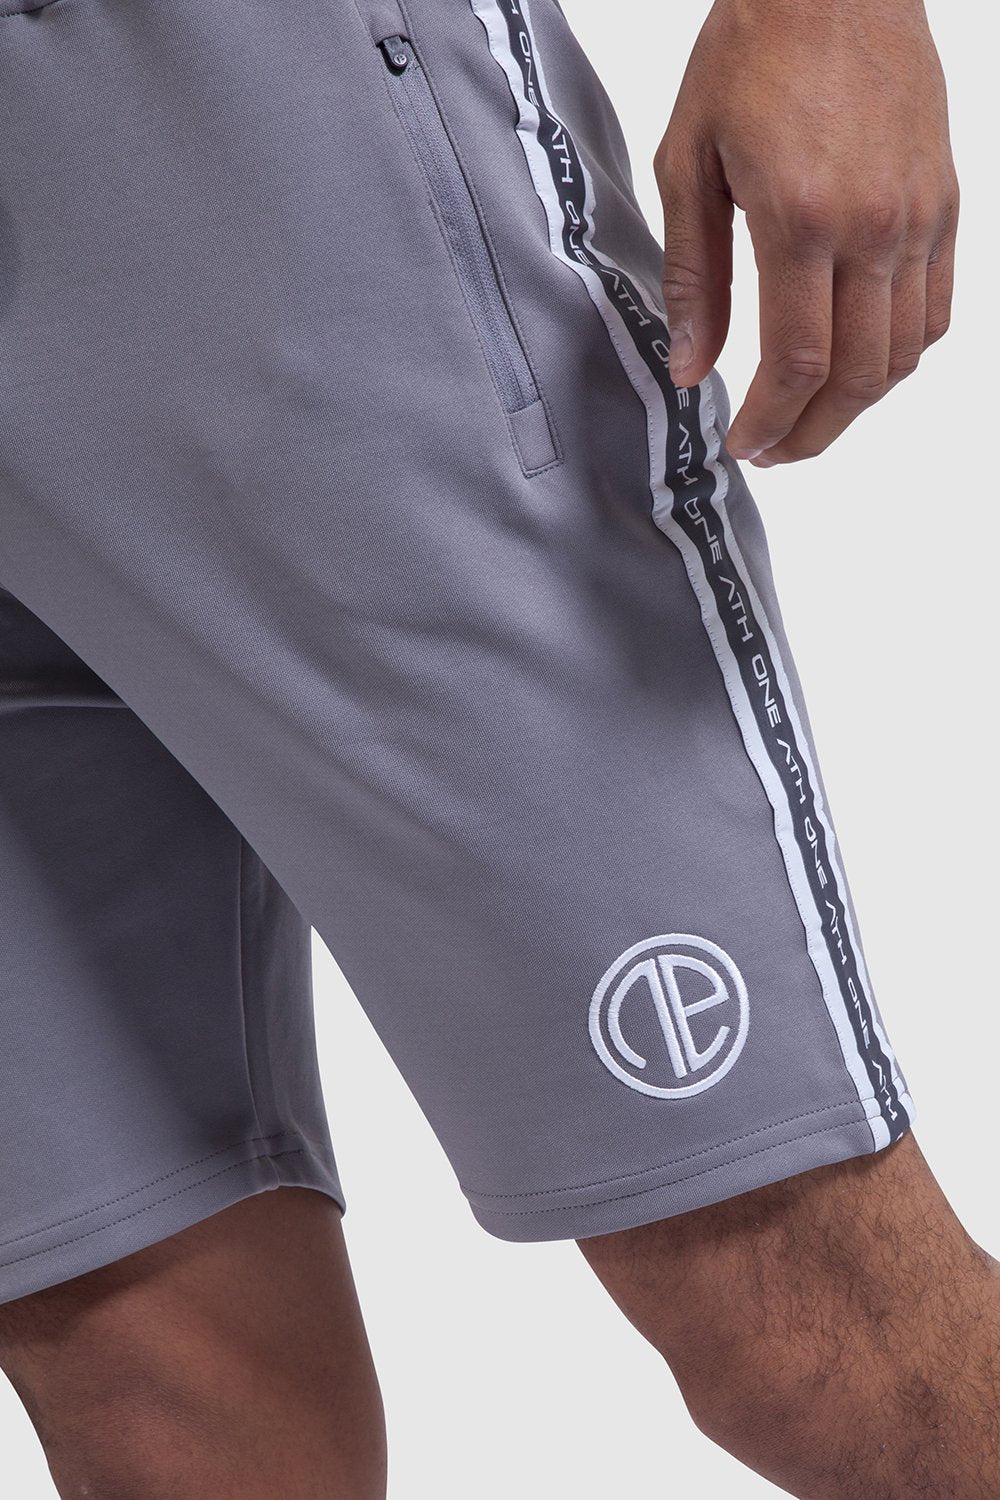 Firestone detail in the mens gym shorts - grey/white